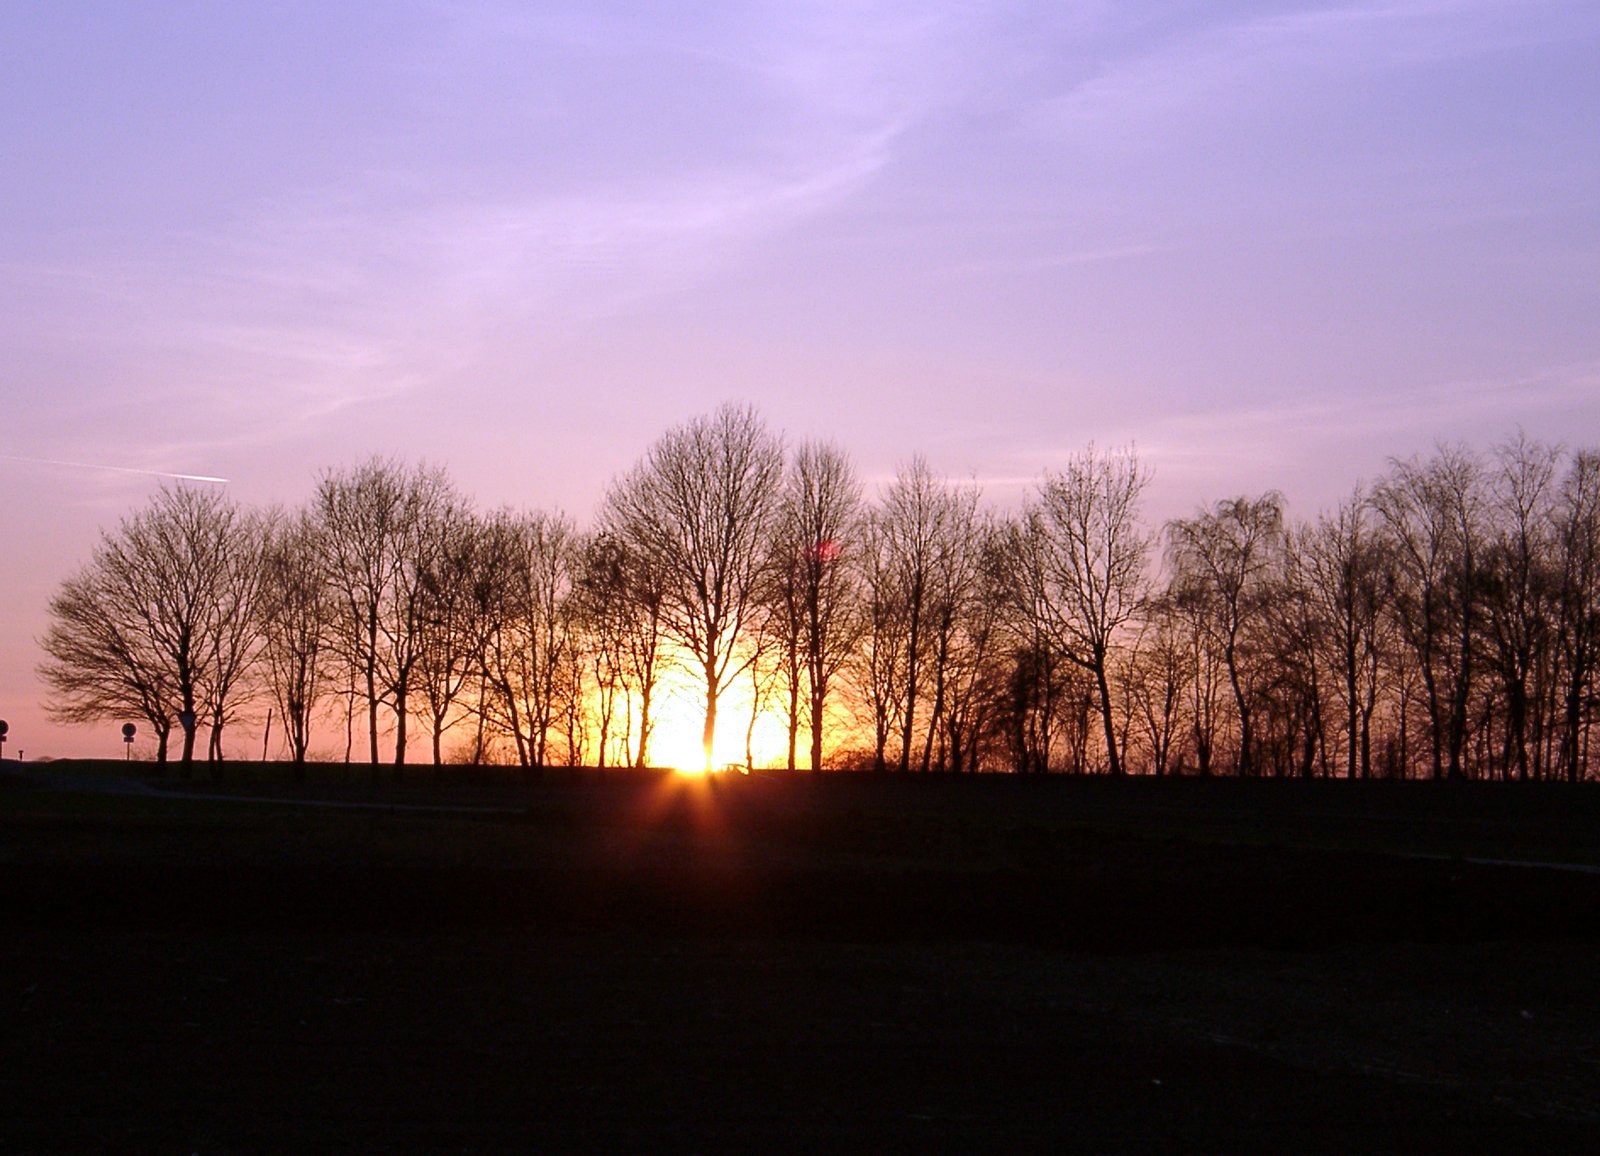 the sun is setting in the distance over some trees